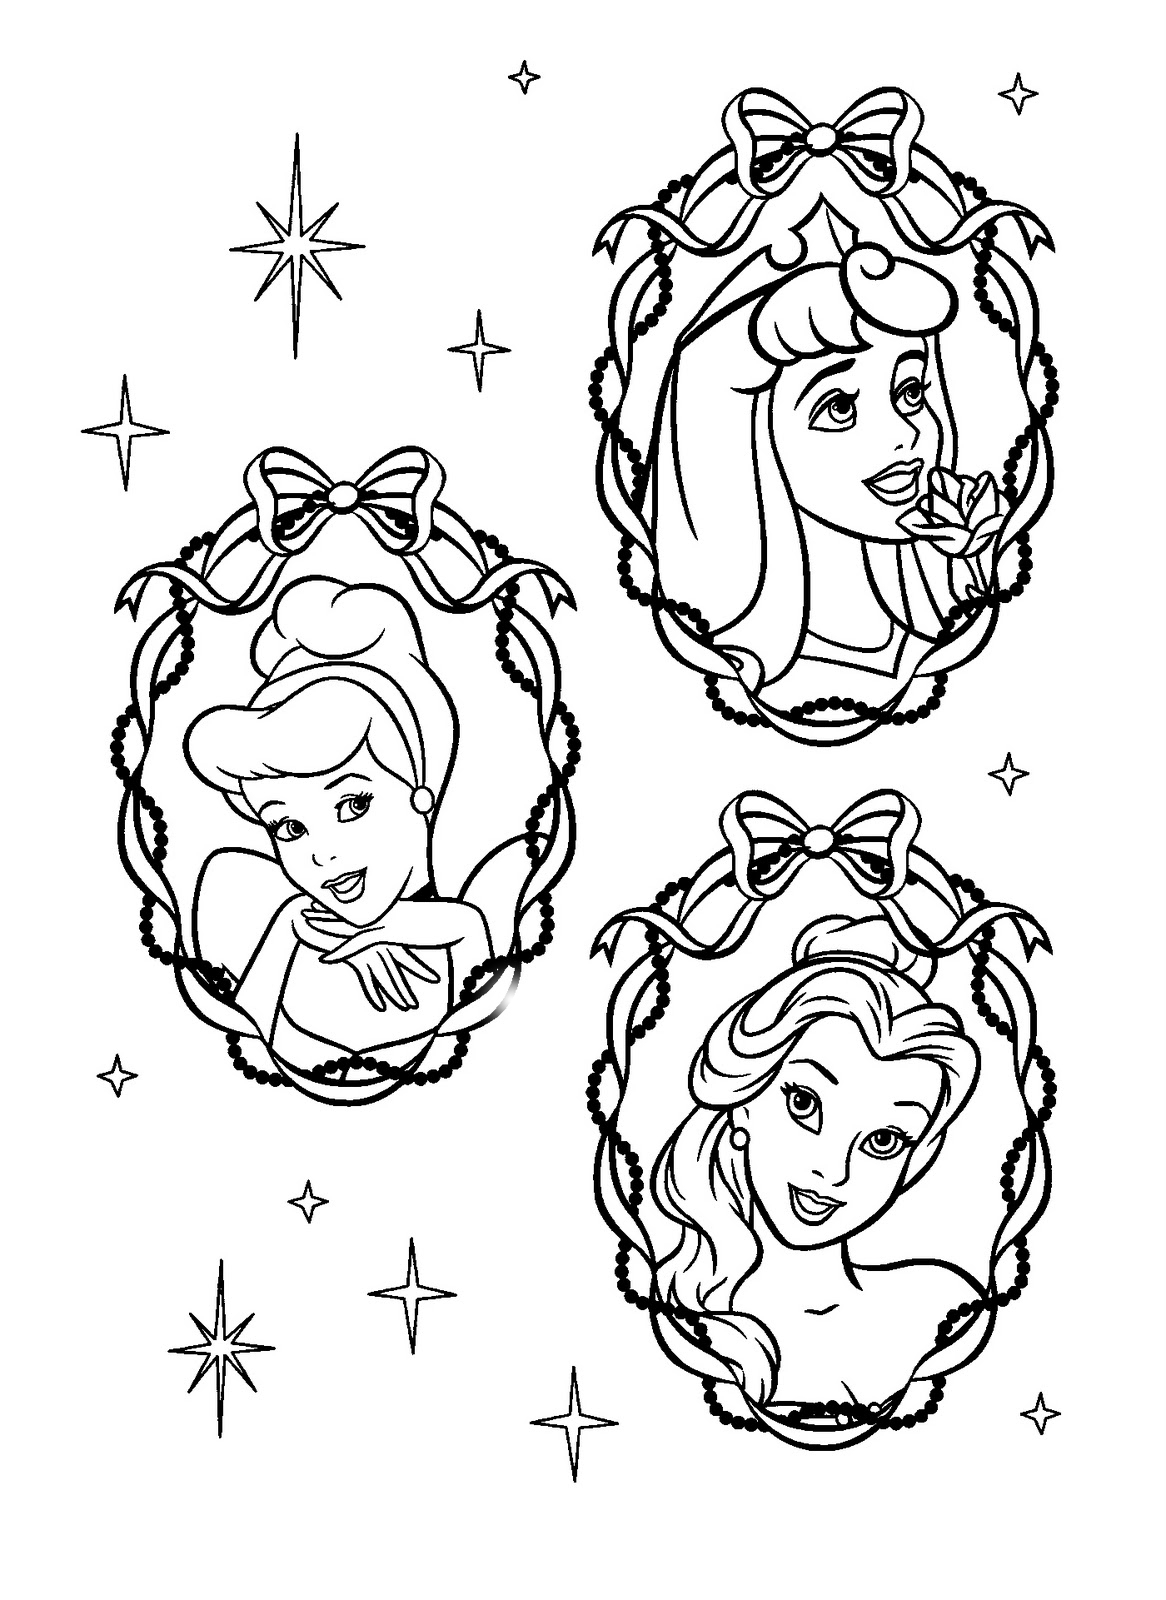 Disney Princesses coloring page   free printable coloring pages on ...